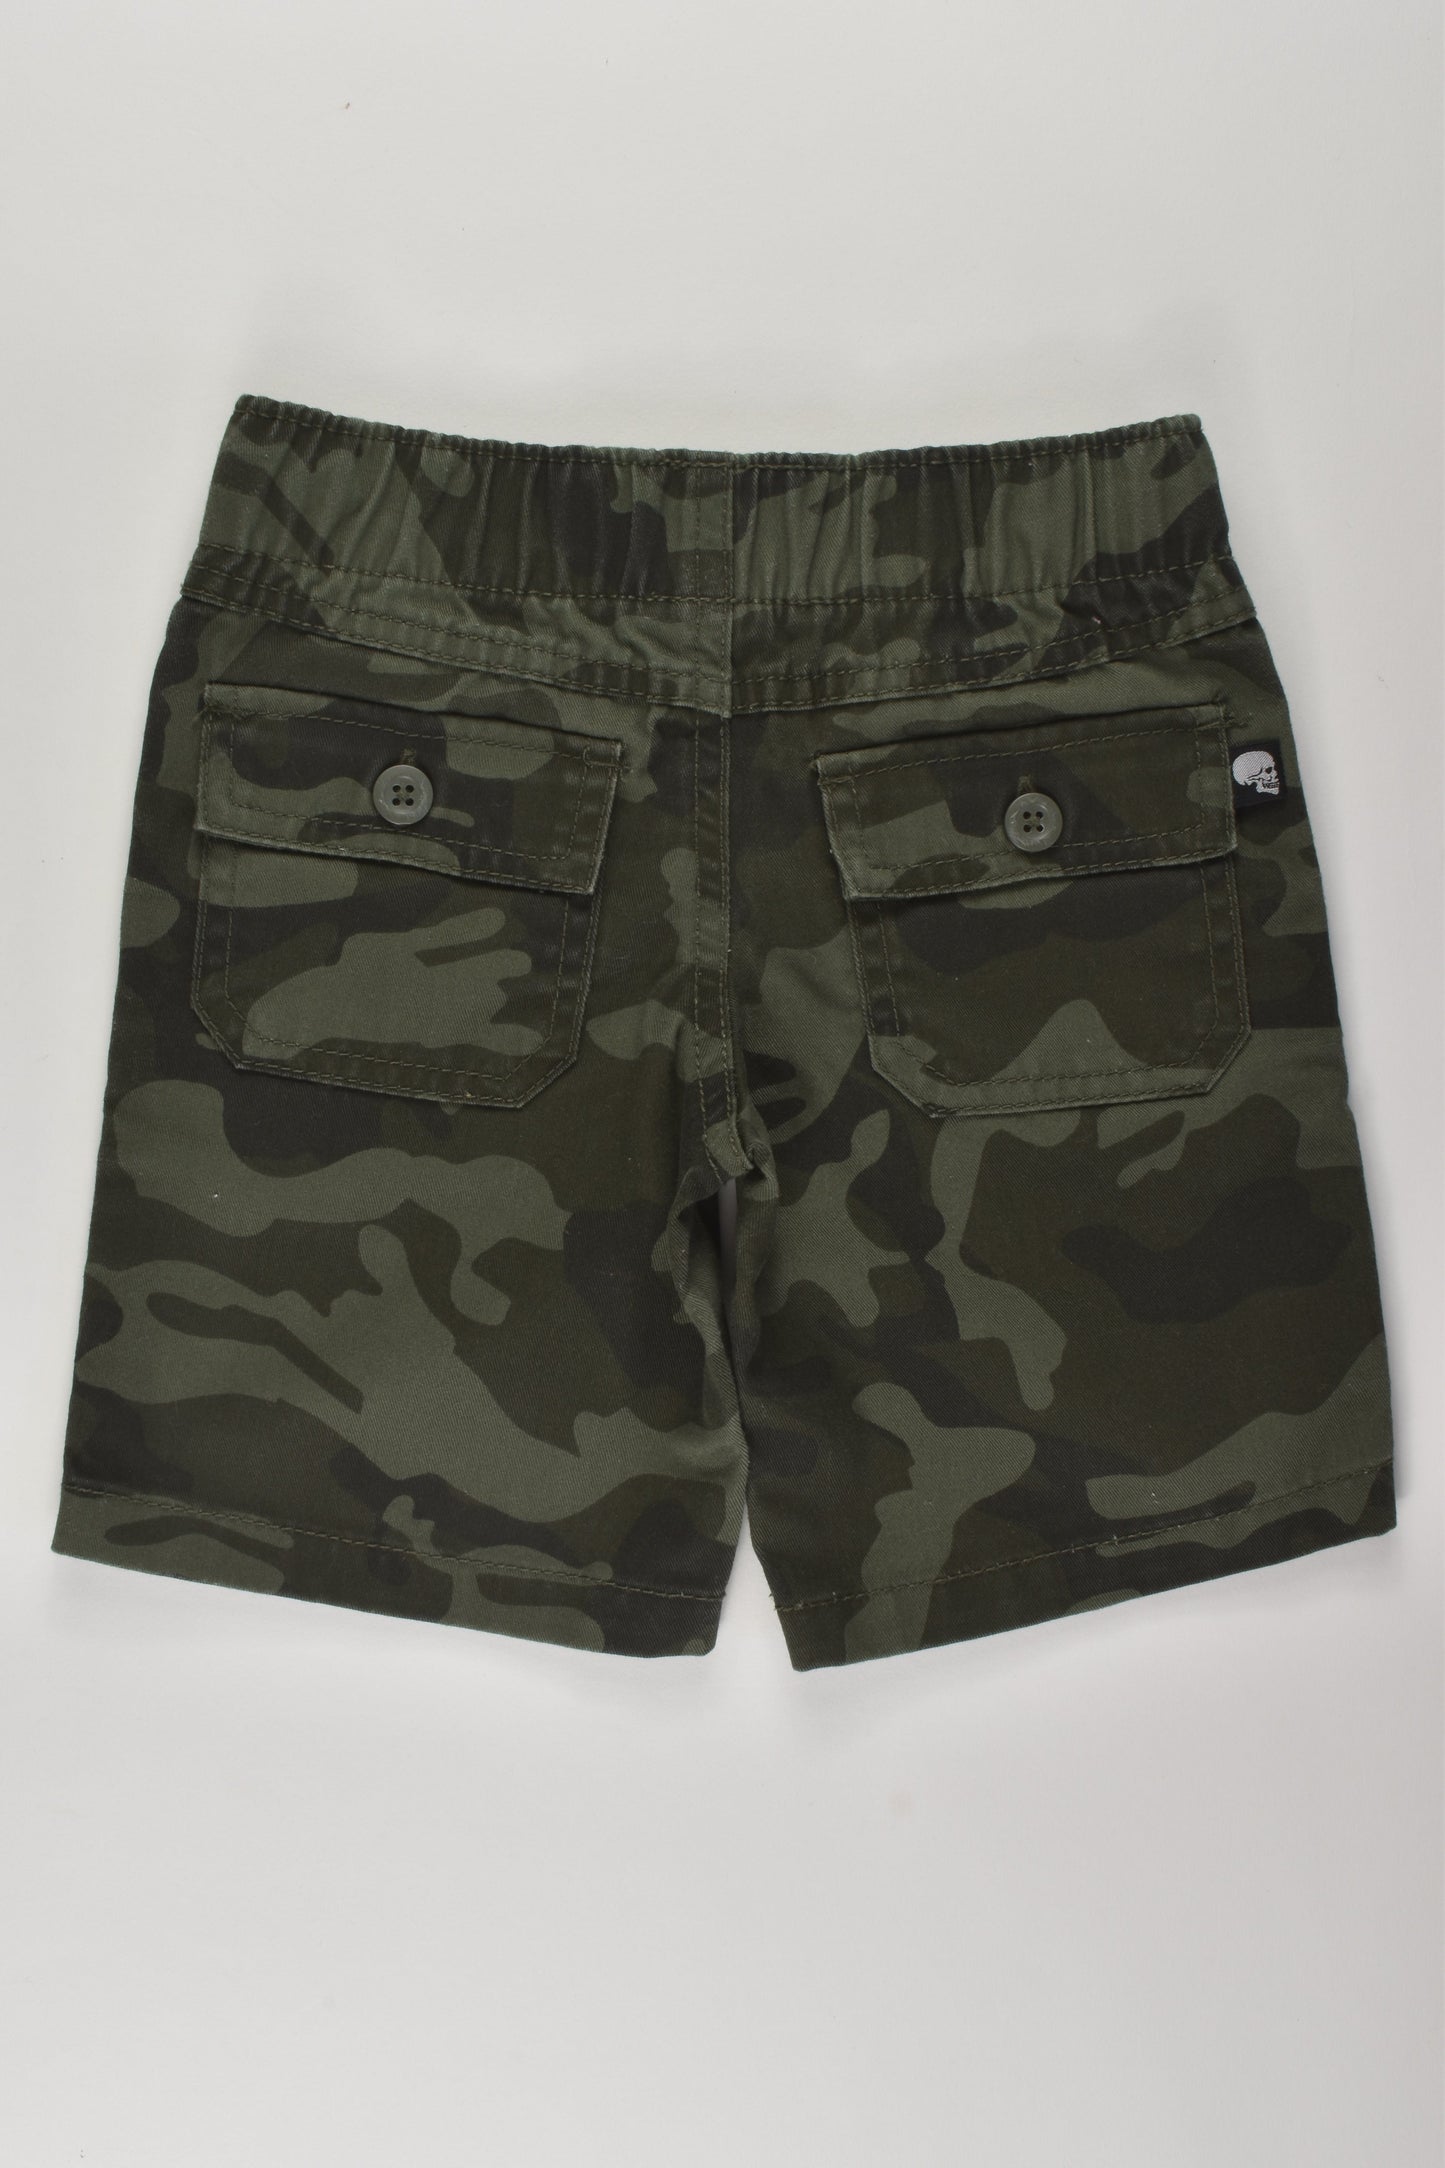 Emerson Size 1 Camouflage Shorts